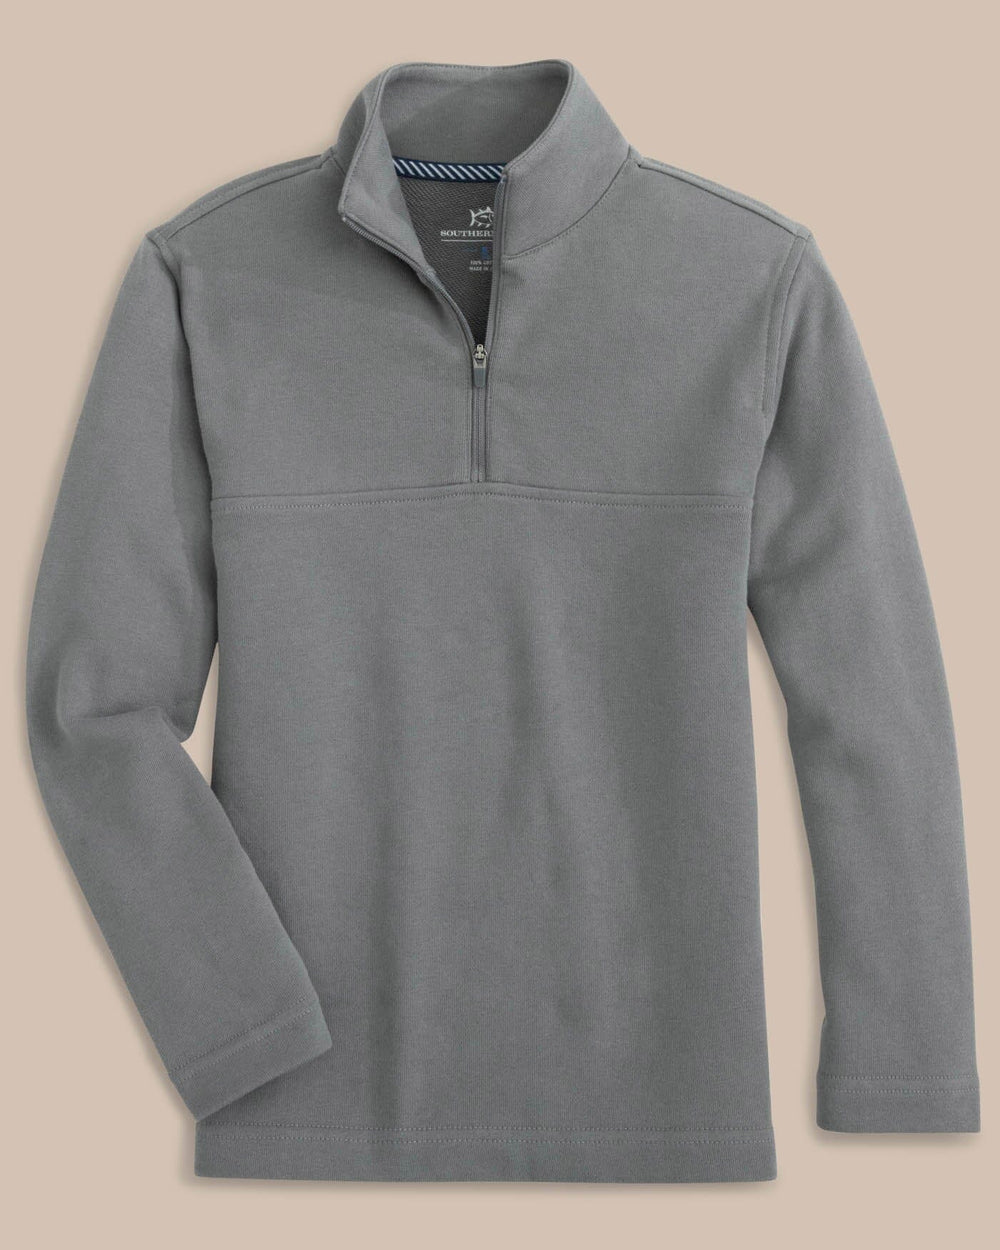 The front view of the Southern Tide Youth McLain Quarter Zip by Southern Tide - Shadow Grey